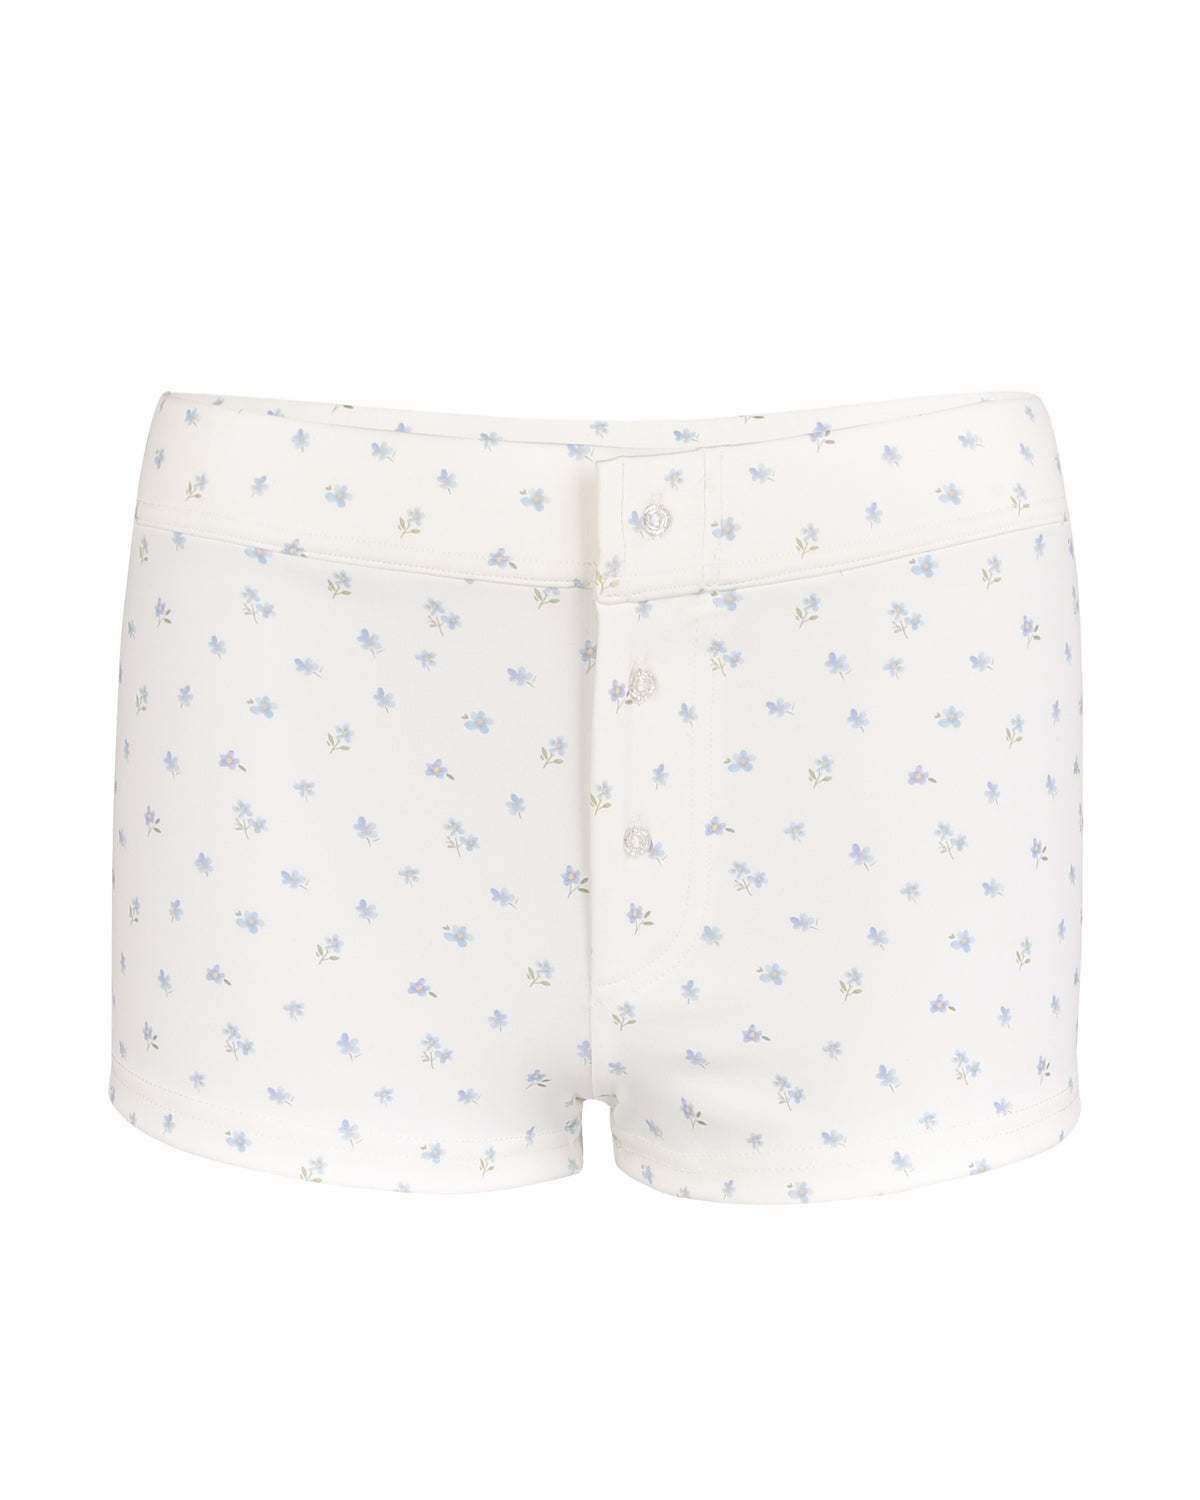 On The Go Shorts - Blue Wishes